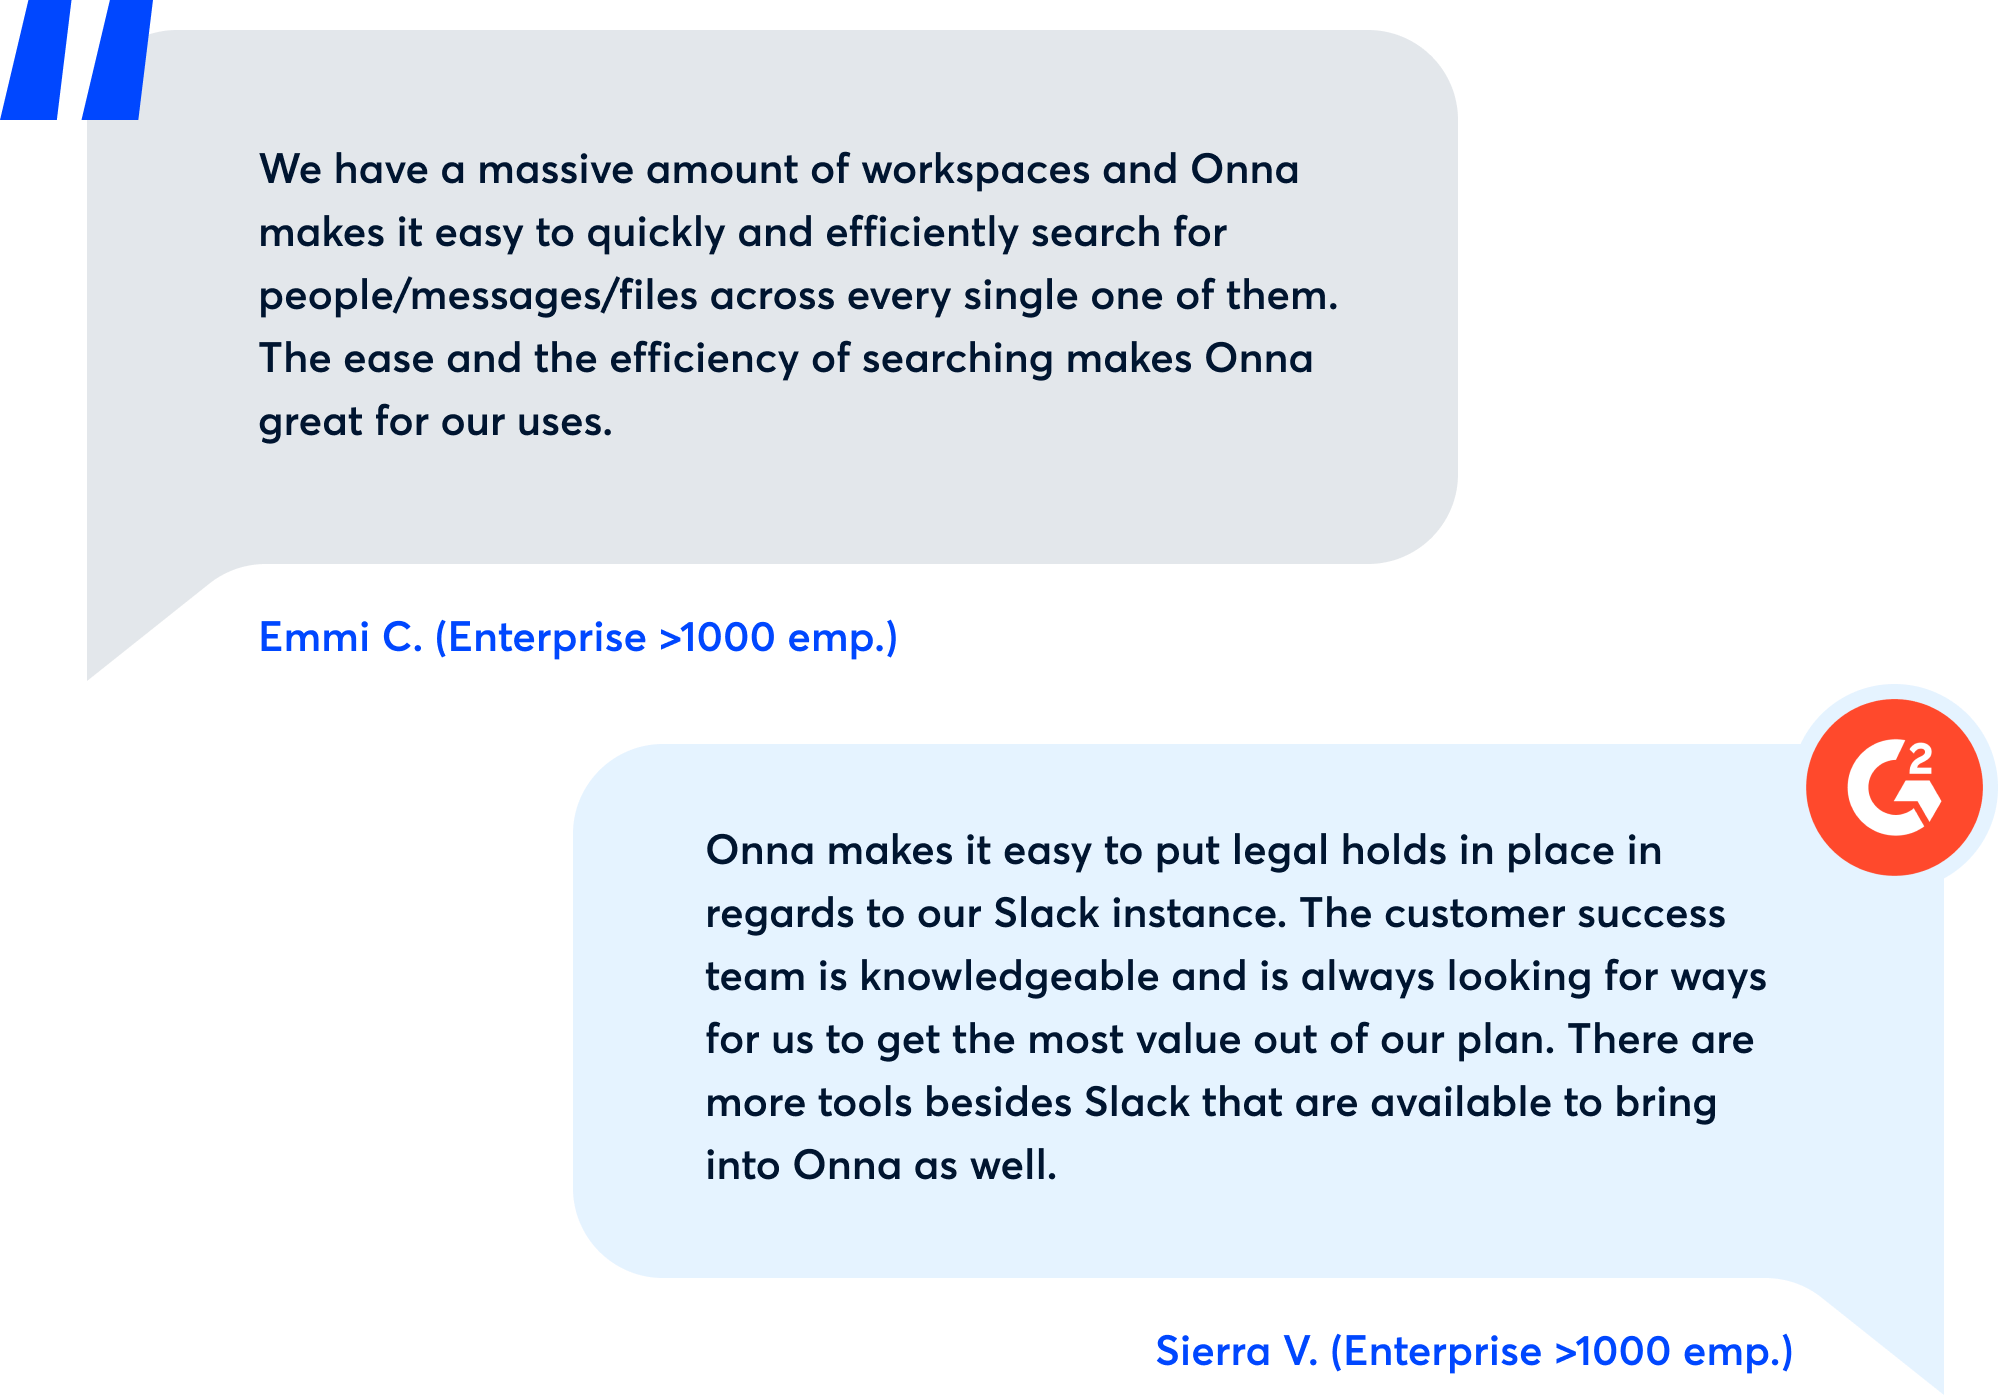 Snapshot of customer reviews for Onna's Slack connector, sourced from the product review website g2.com/products/onna/reviews.